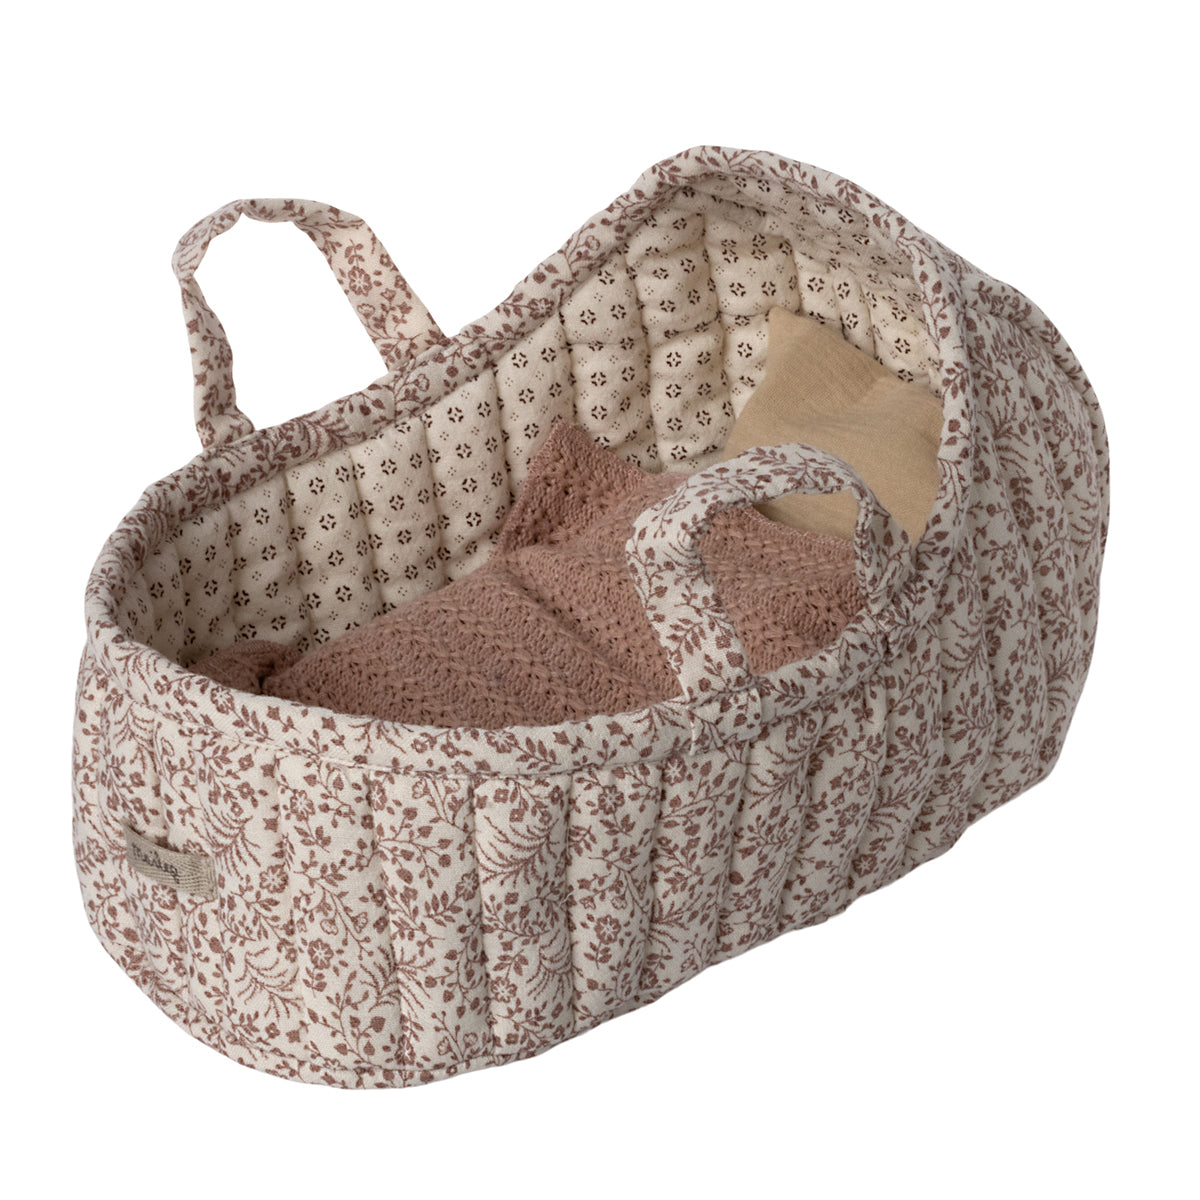 Carry Cot, Large - Off White